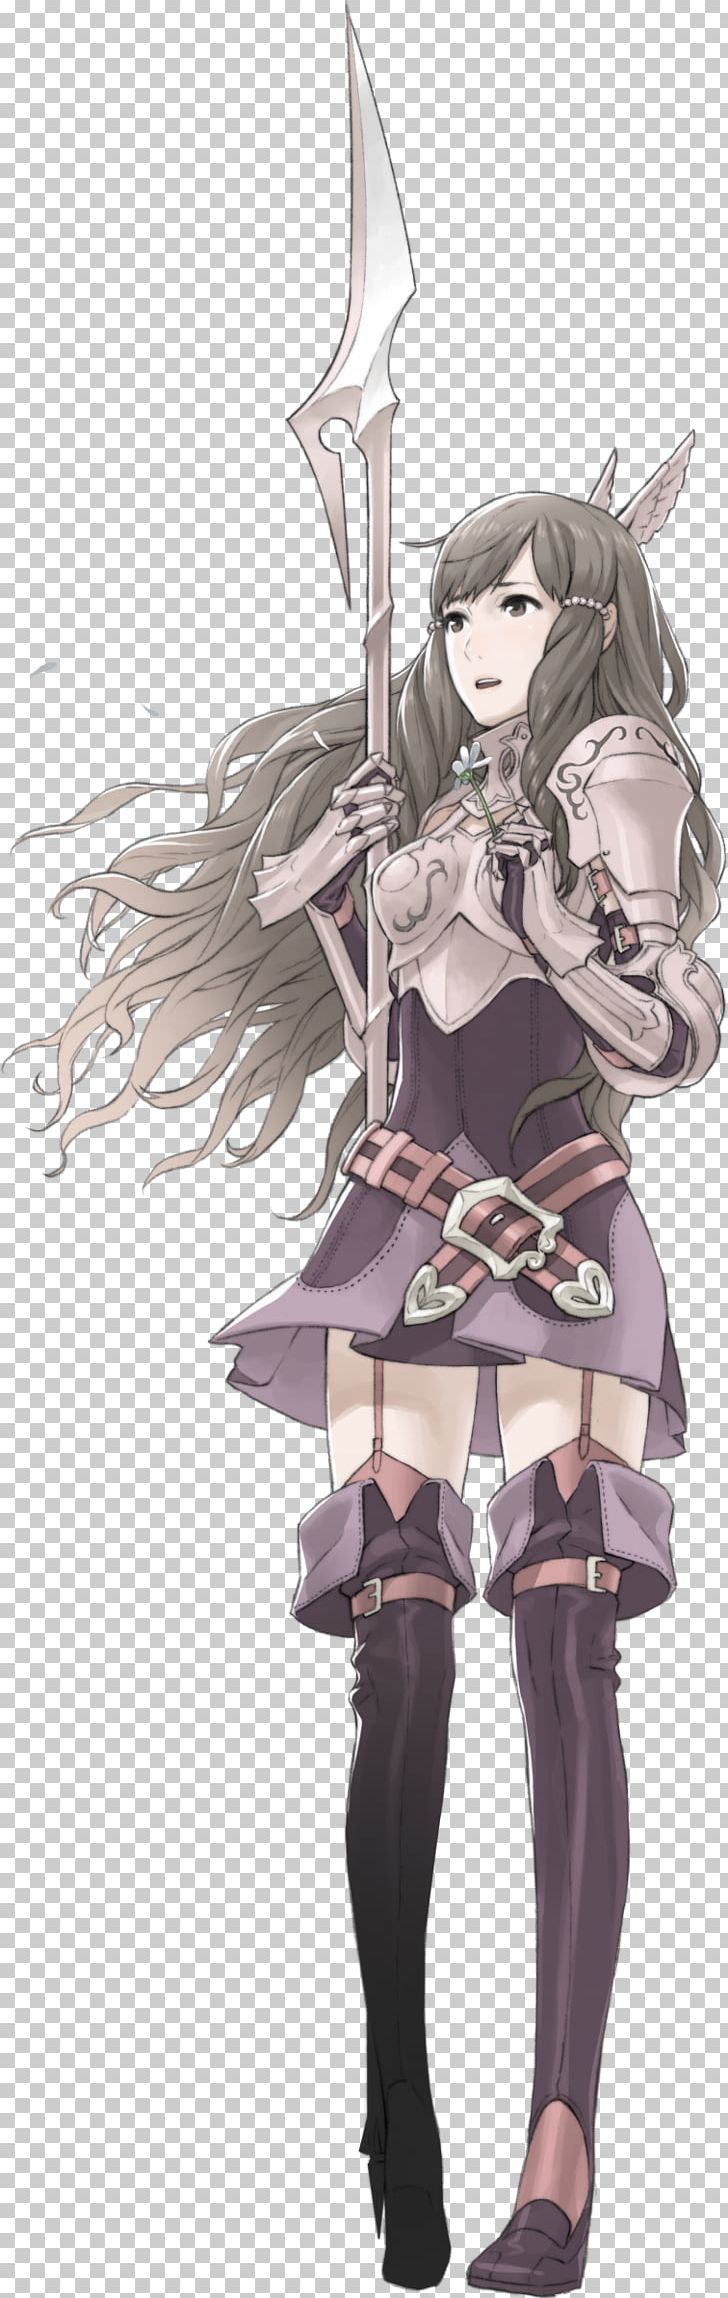 Fire Emblem Awakening Fire Emblem: Shadow Dragon Fire Emblem Fates Tokyo Mirage Sessions ♯FE Video Game PNG, Clipart, Anime, Cg Artwork, Character, Costume Design, Fictional Character Free PNG Download